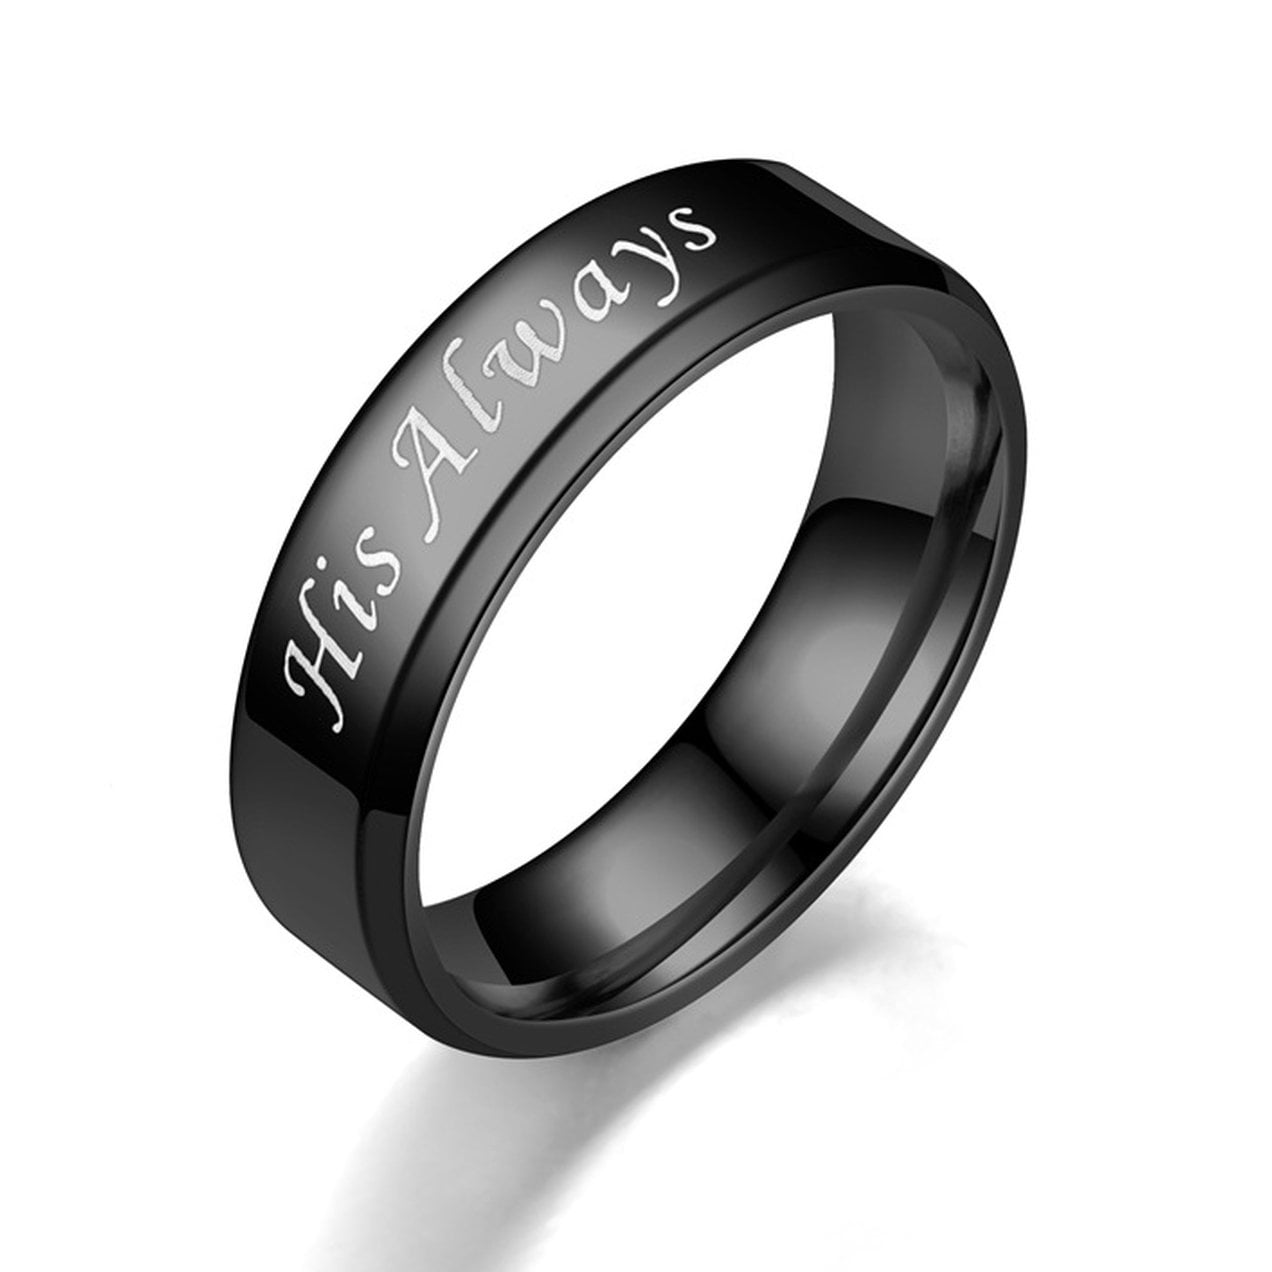 Romantic Black Stainless Steel Couples Ring Her Buck His Doe Elk Promise Ring Engagement Wedding Band for Valentines Anniversary 